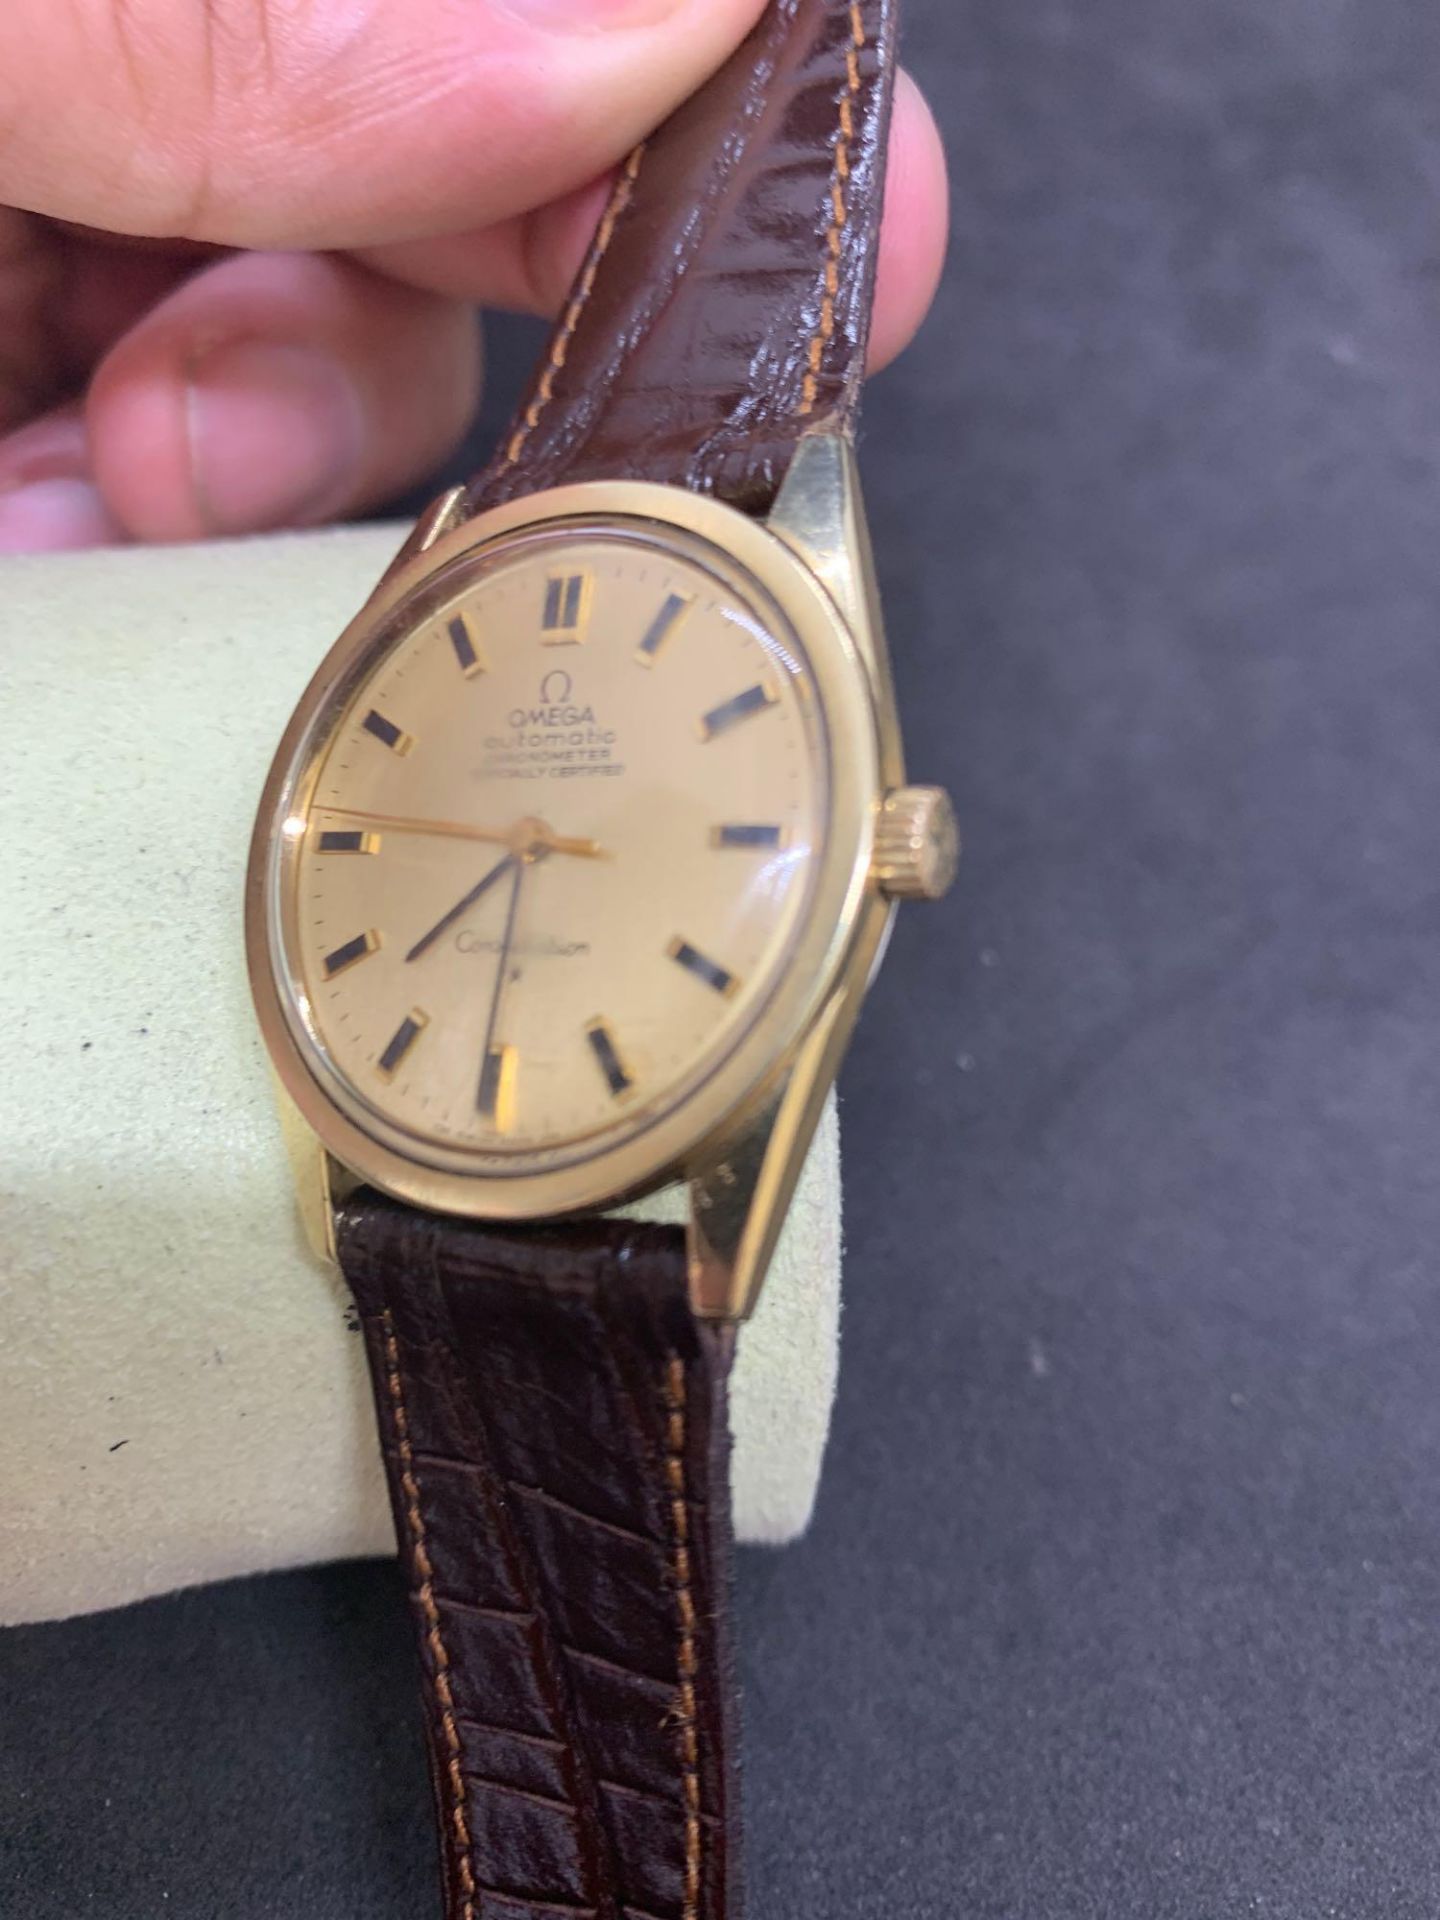 Gents Omega constellation automatic watch approximately 35 mm - Image 2 of 6